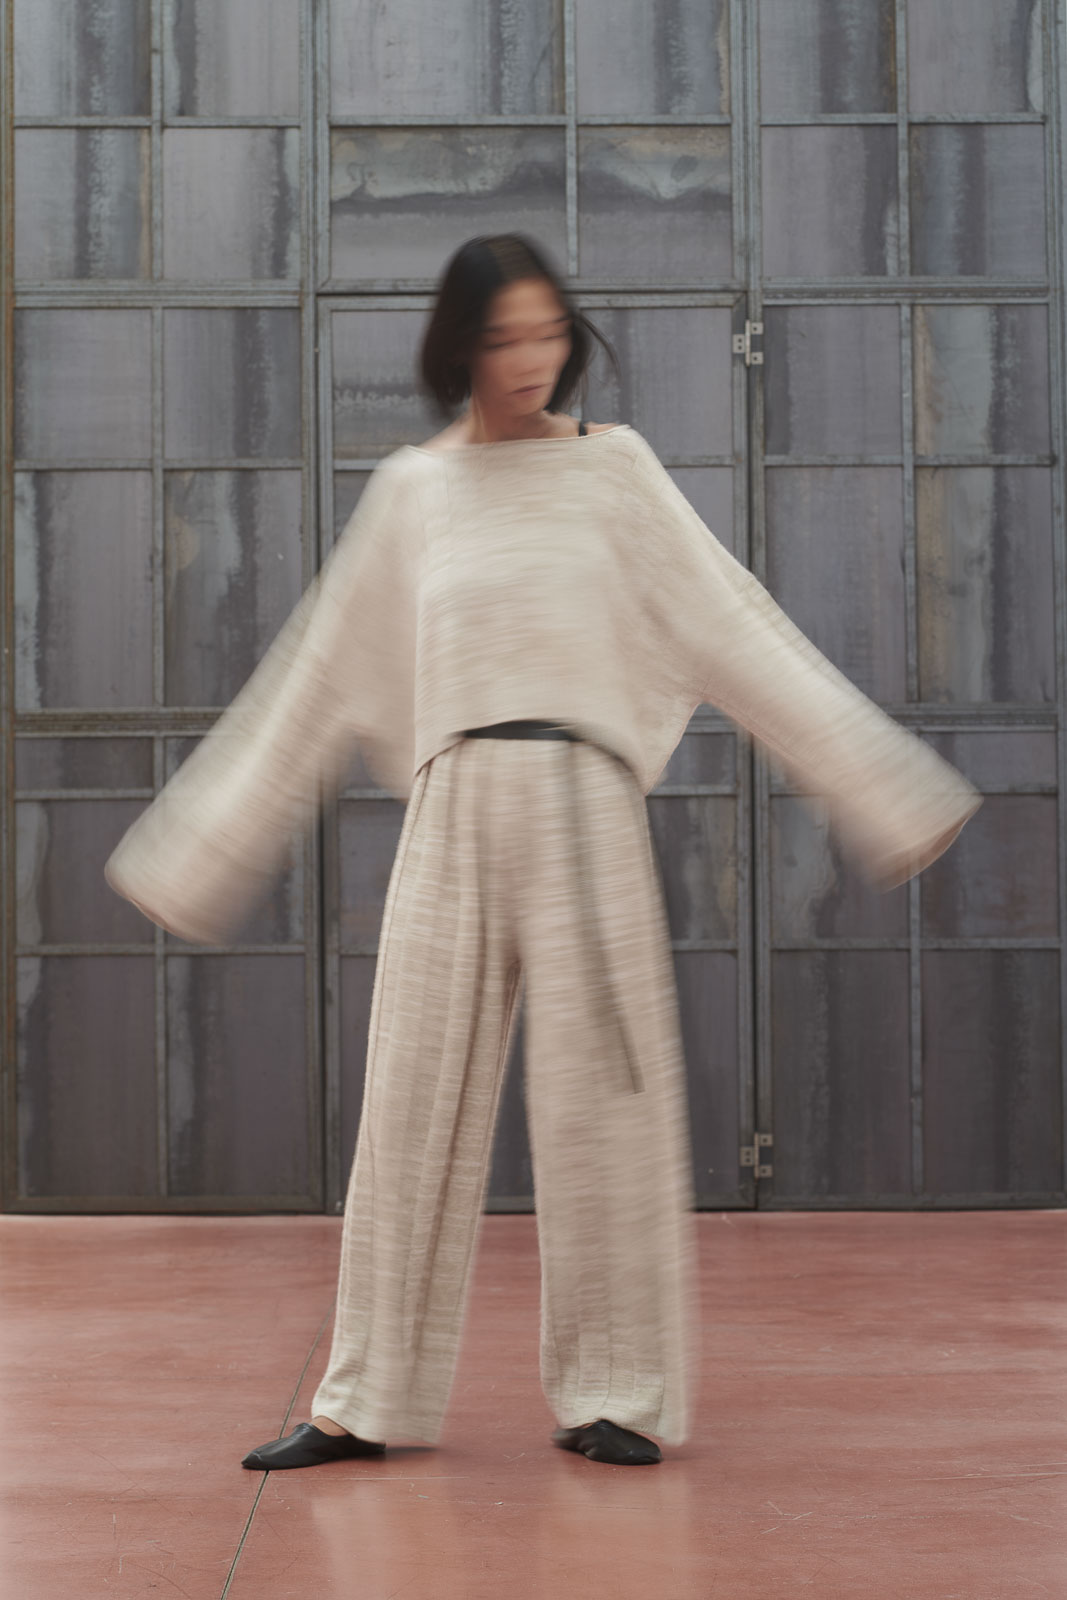 woman dressing a knitwear cashmere dress, waving her arms 